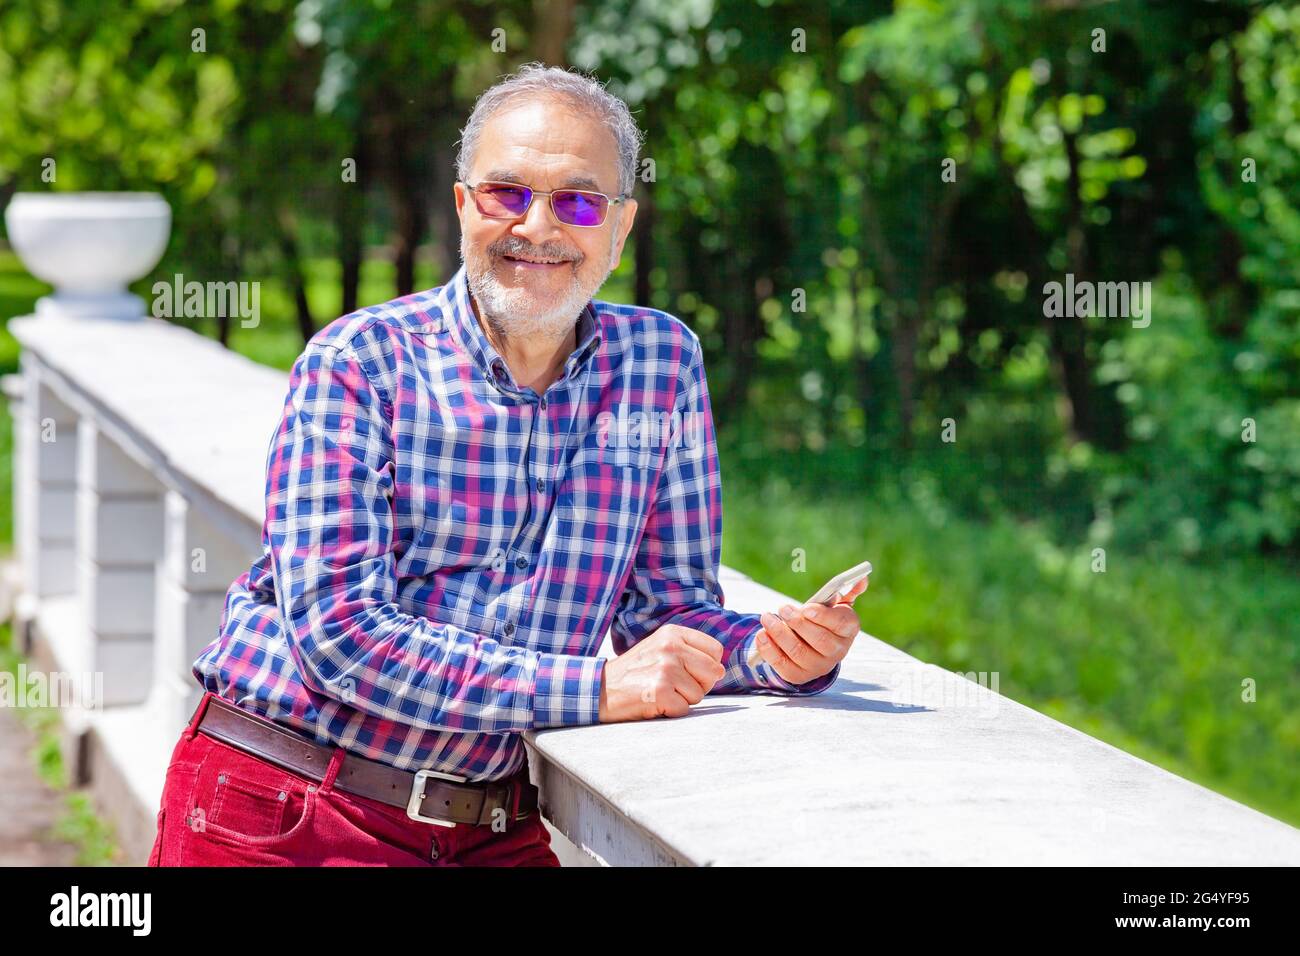 Happy pensioner in his seventies with eye glasses and phone in his hand smiling relaxed in the park during spring or summer time, looking at camera. Stock Photo